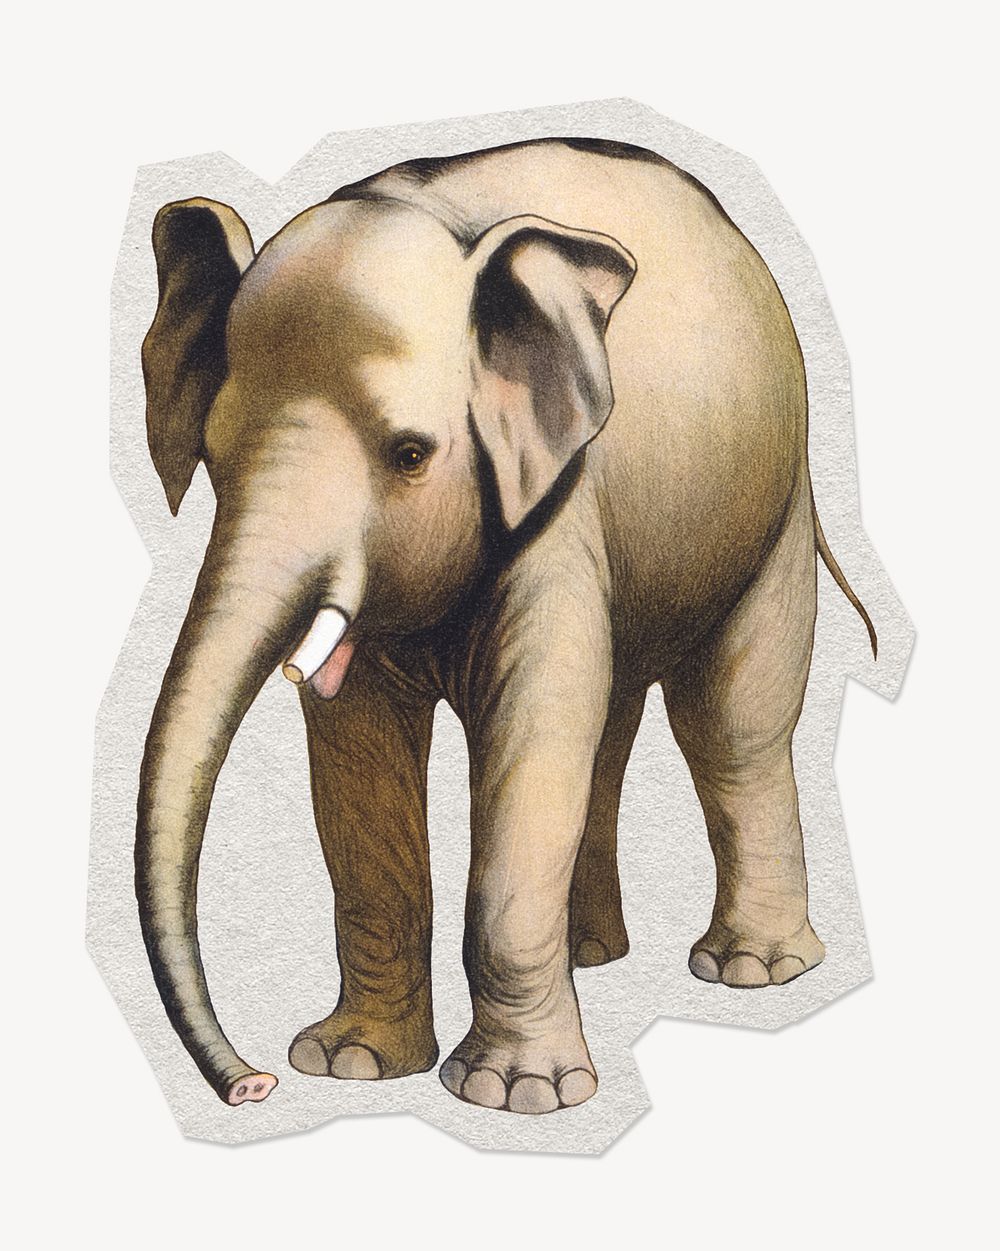 Elephant African animal paper element with white border